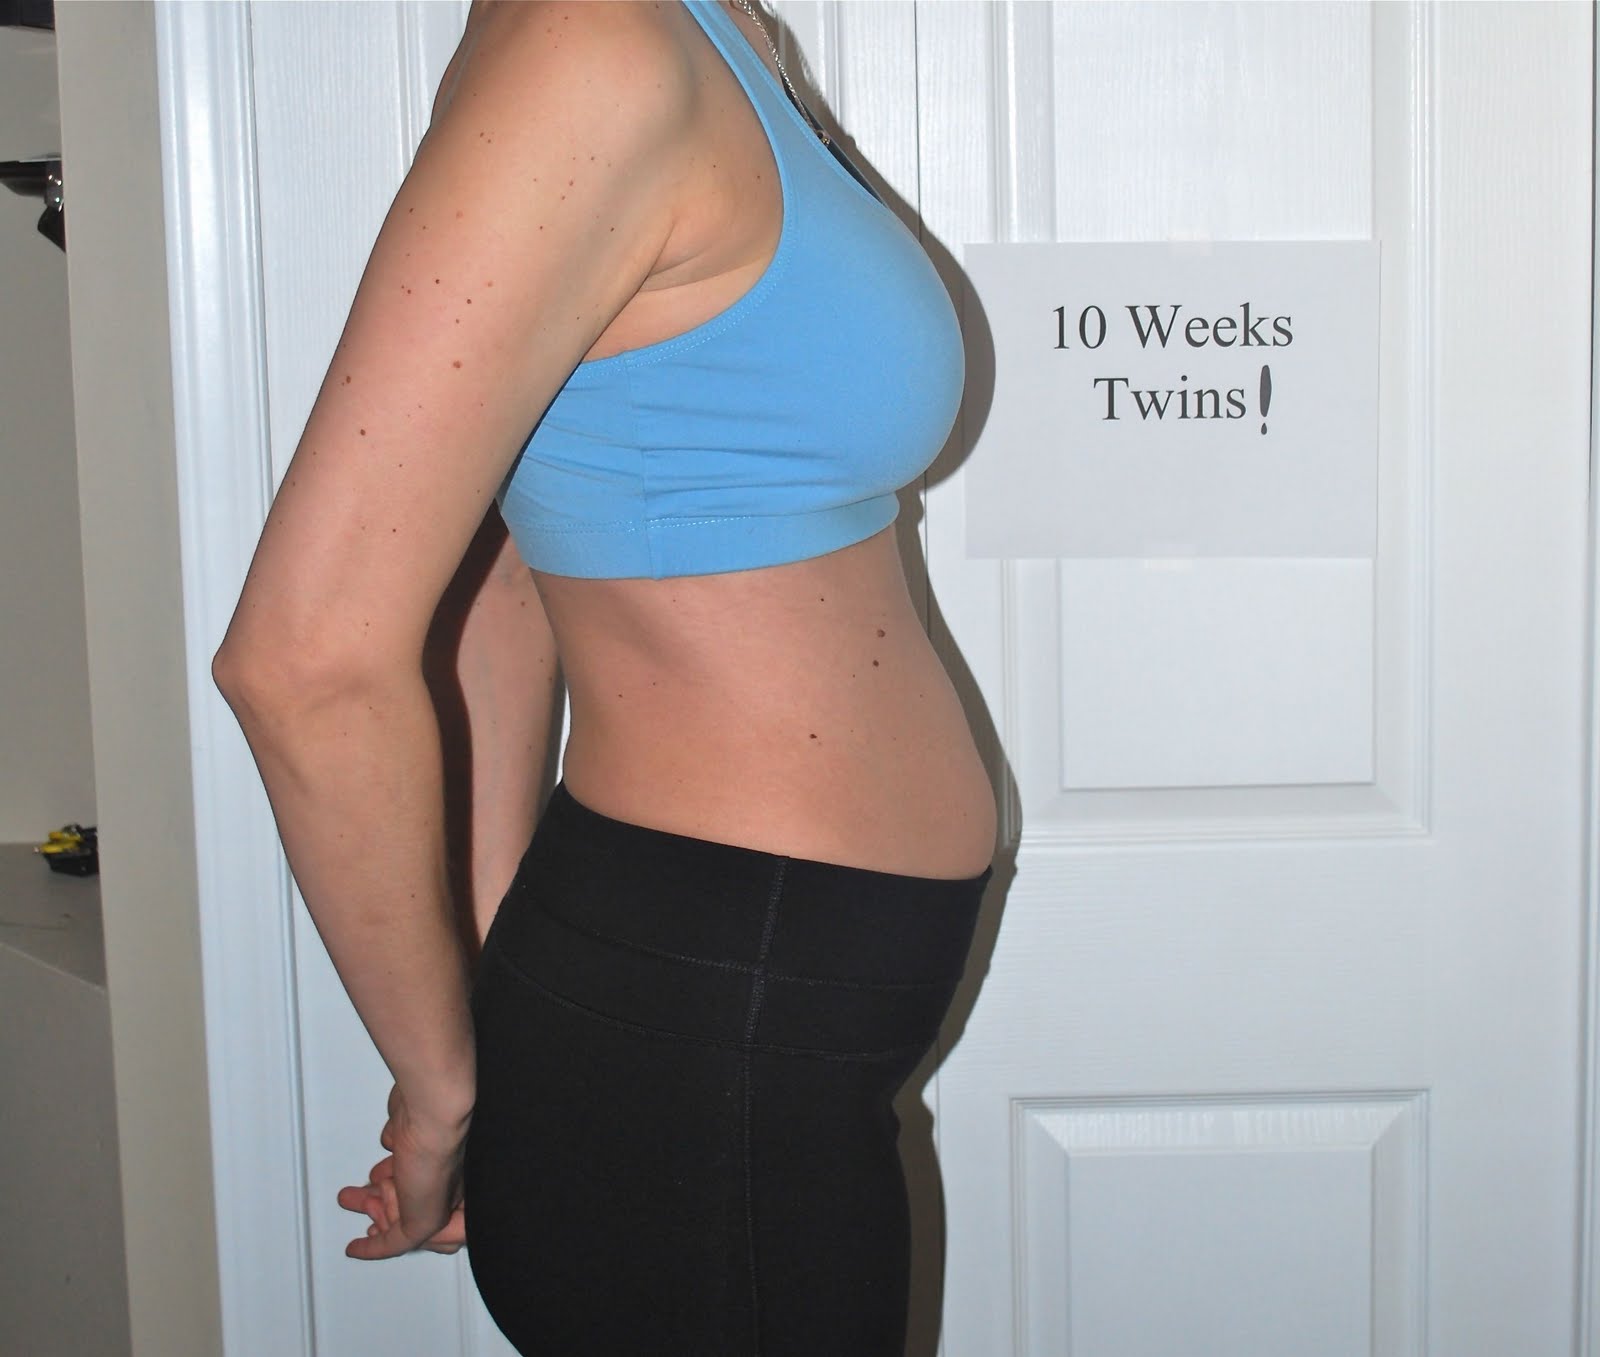 Four Months Pregnant With Twins 56